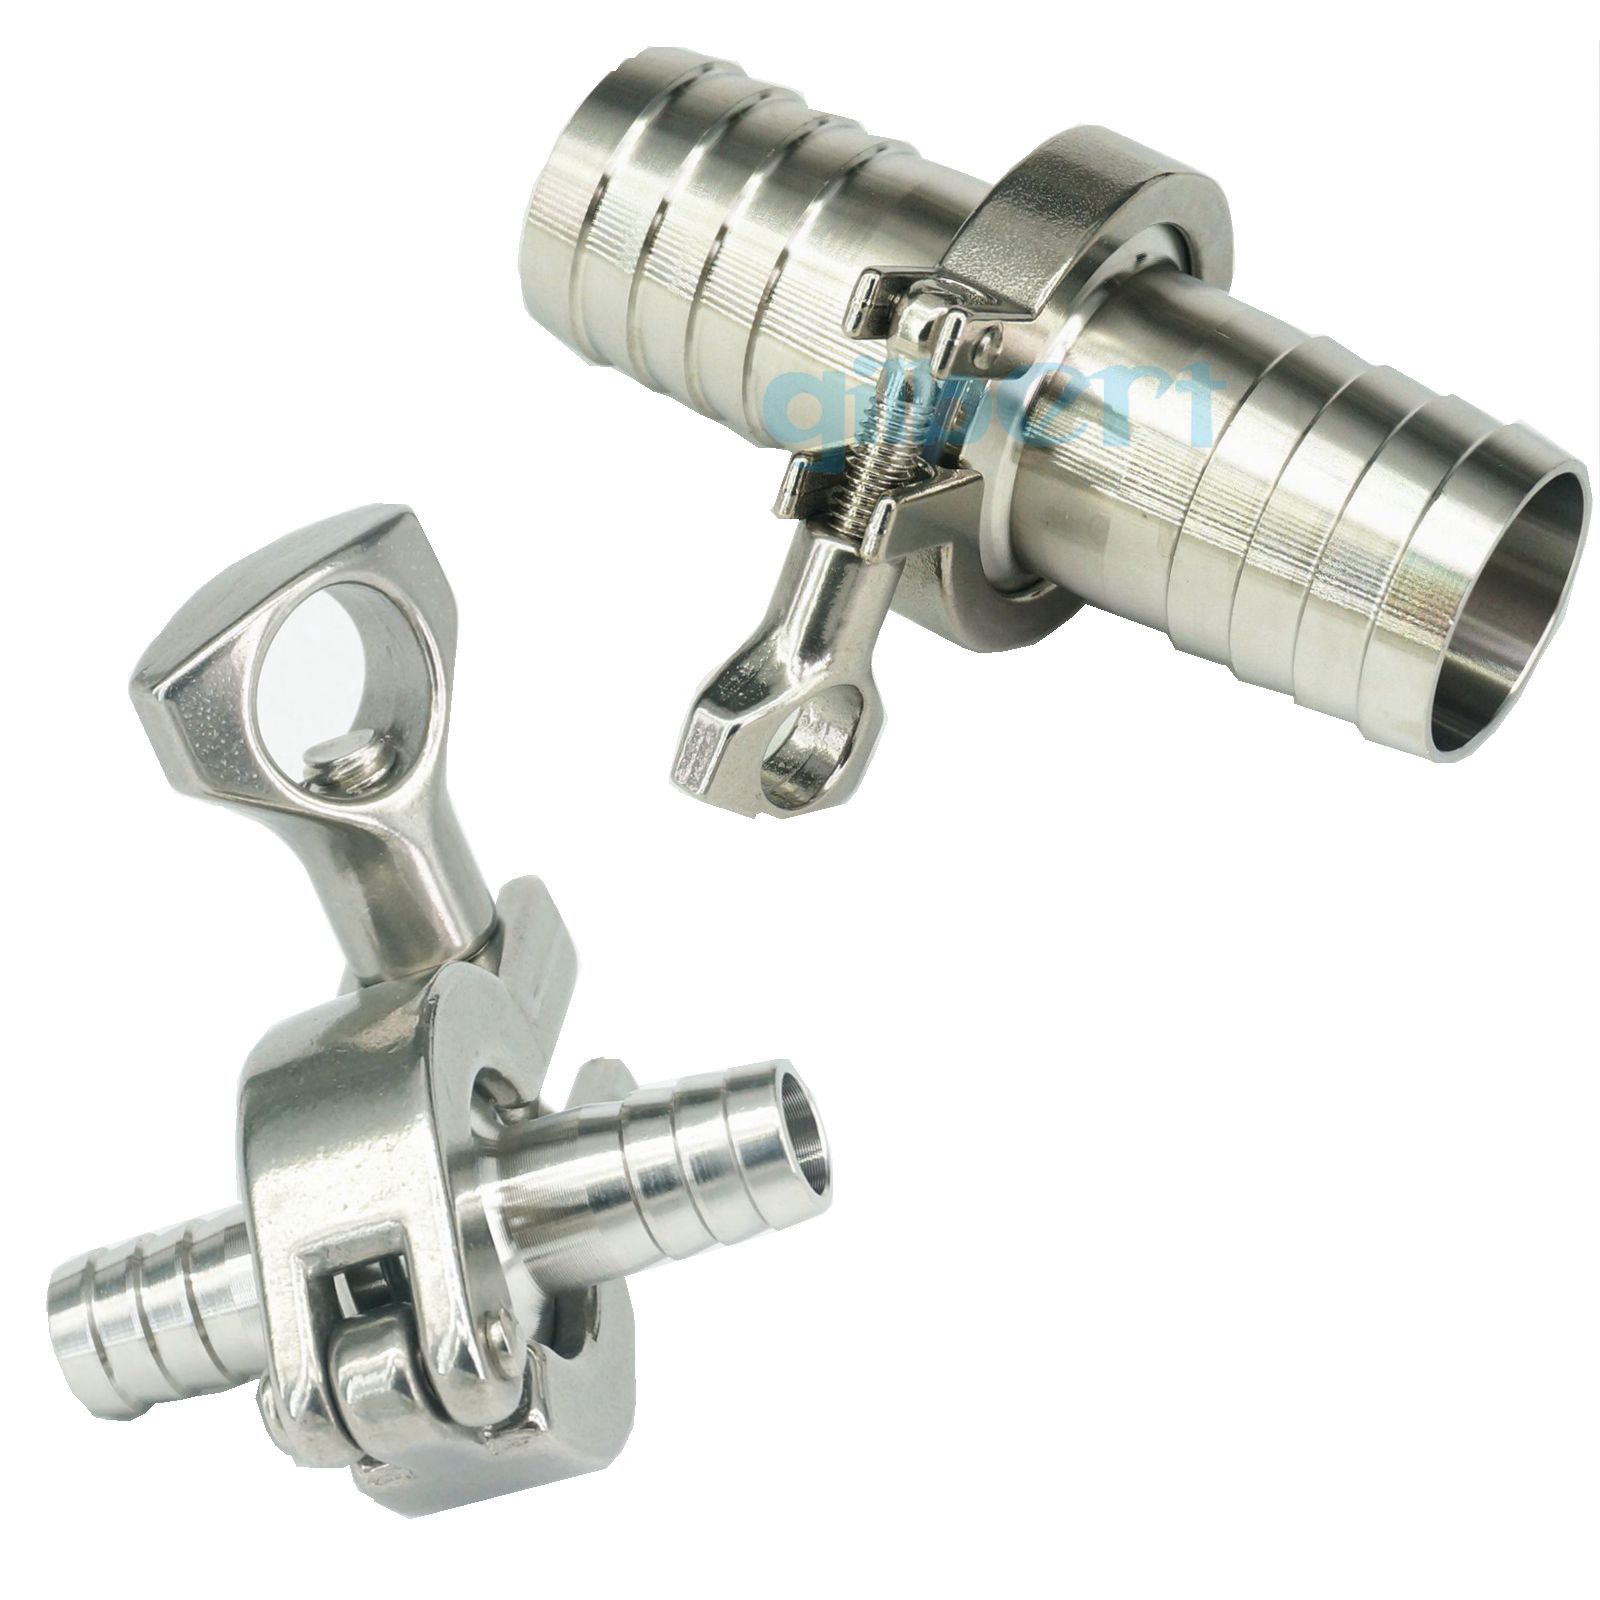 10-76mm Hose Barbed x 0.5" 1.5" 2" 2.5" 3" 3.5" Tri Clamp Set 304 Stainless Sanitary Ferrule Fitting Tri-Clover Brew